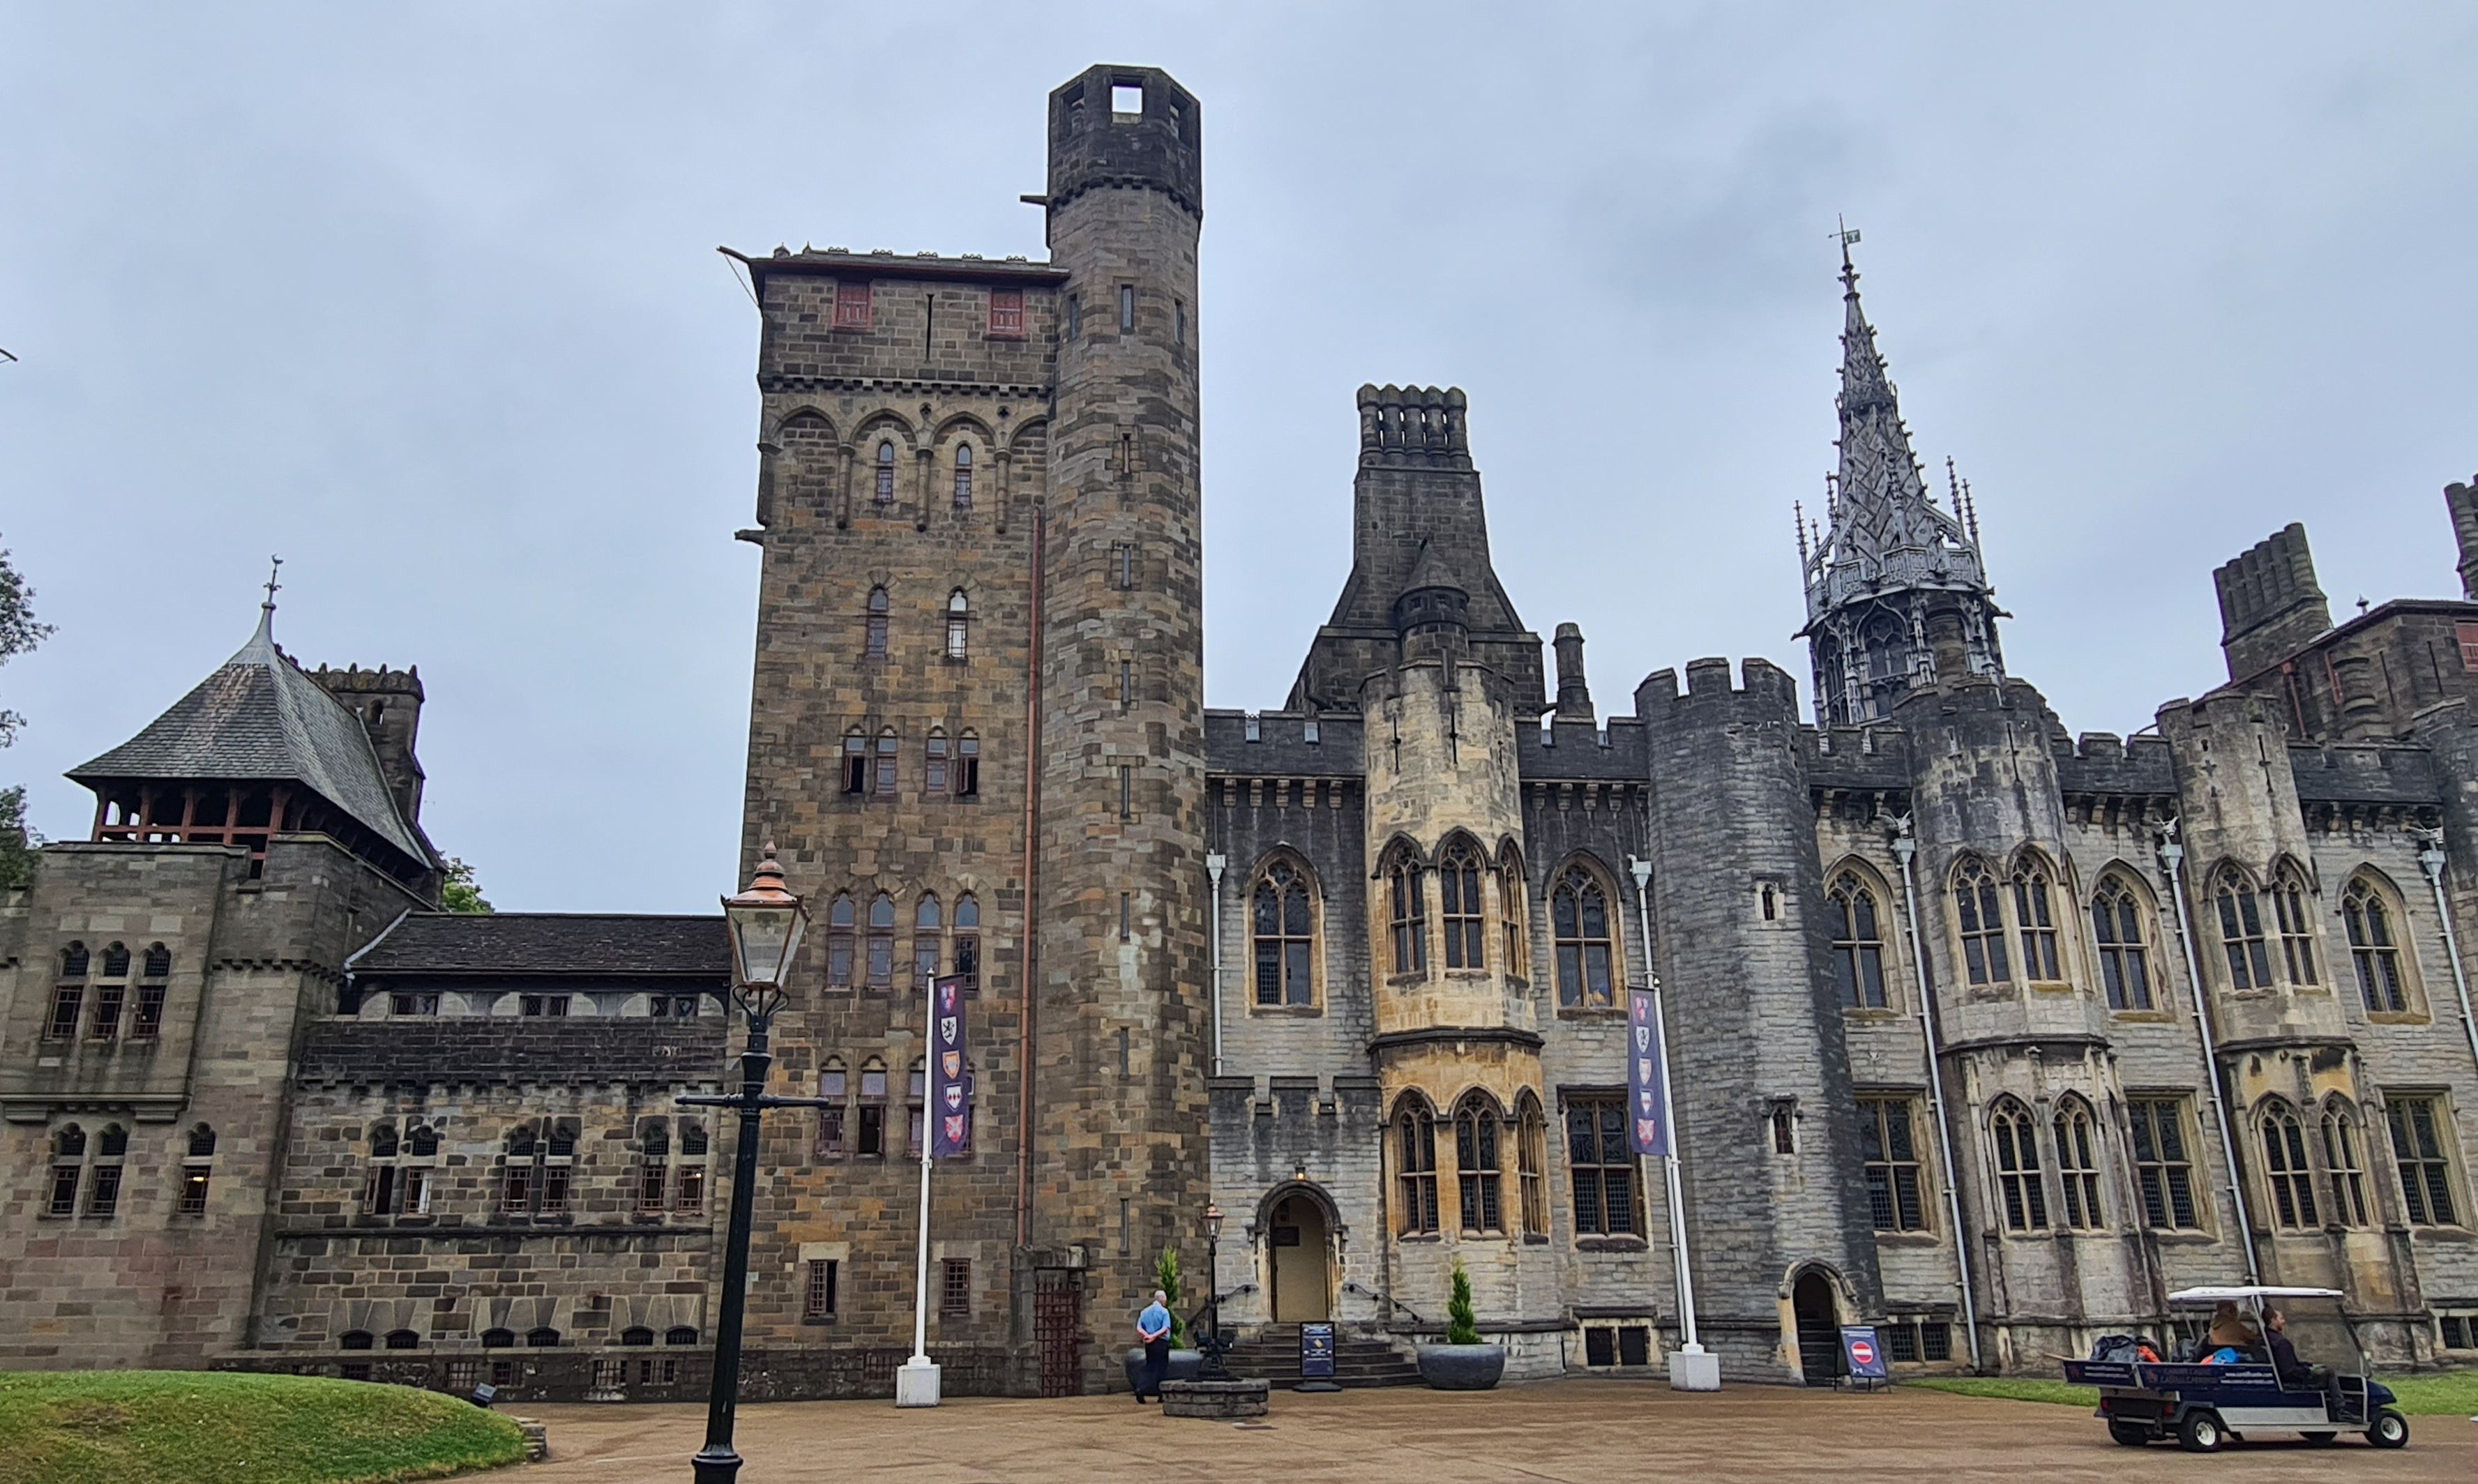 A day trip to Cardiff